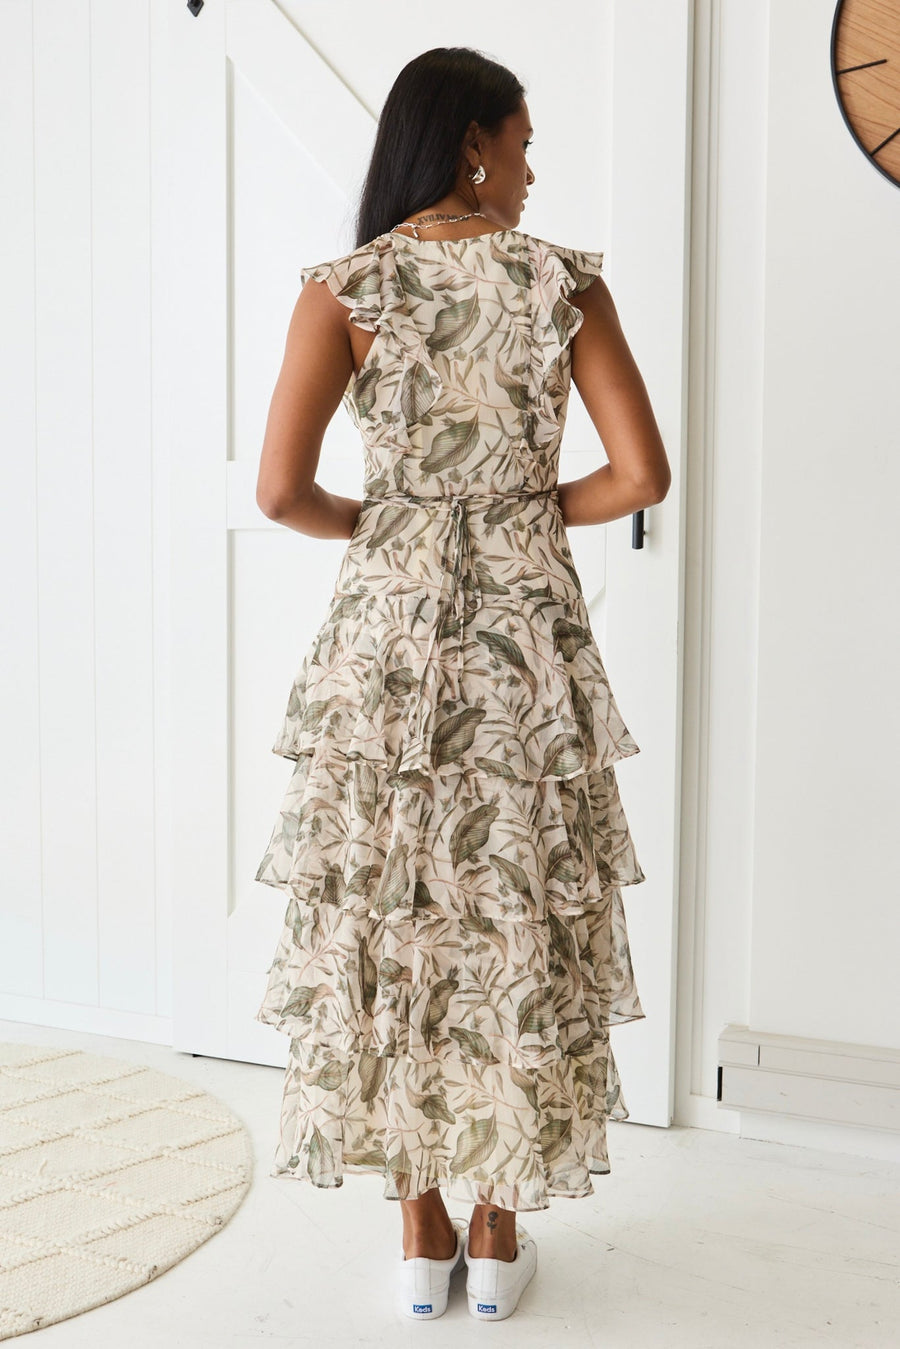 BY ROSA EVERLY IVORY FLORAL FLUTTER SLEEVE TIERED DRESS - WILDROSE